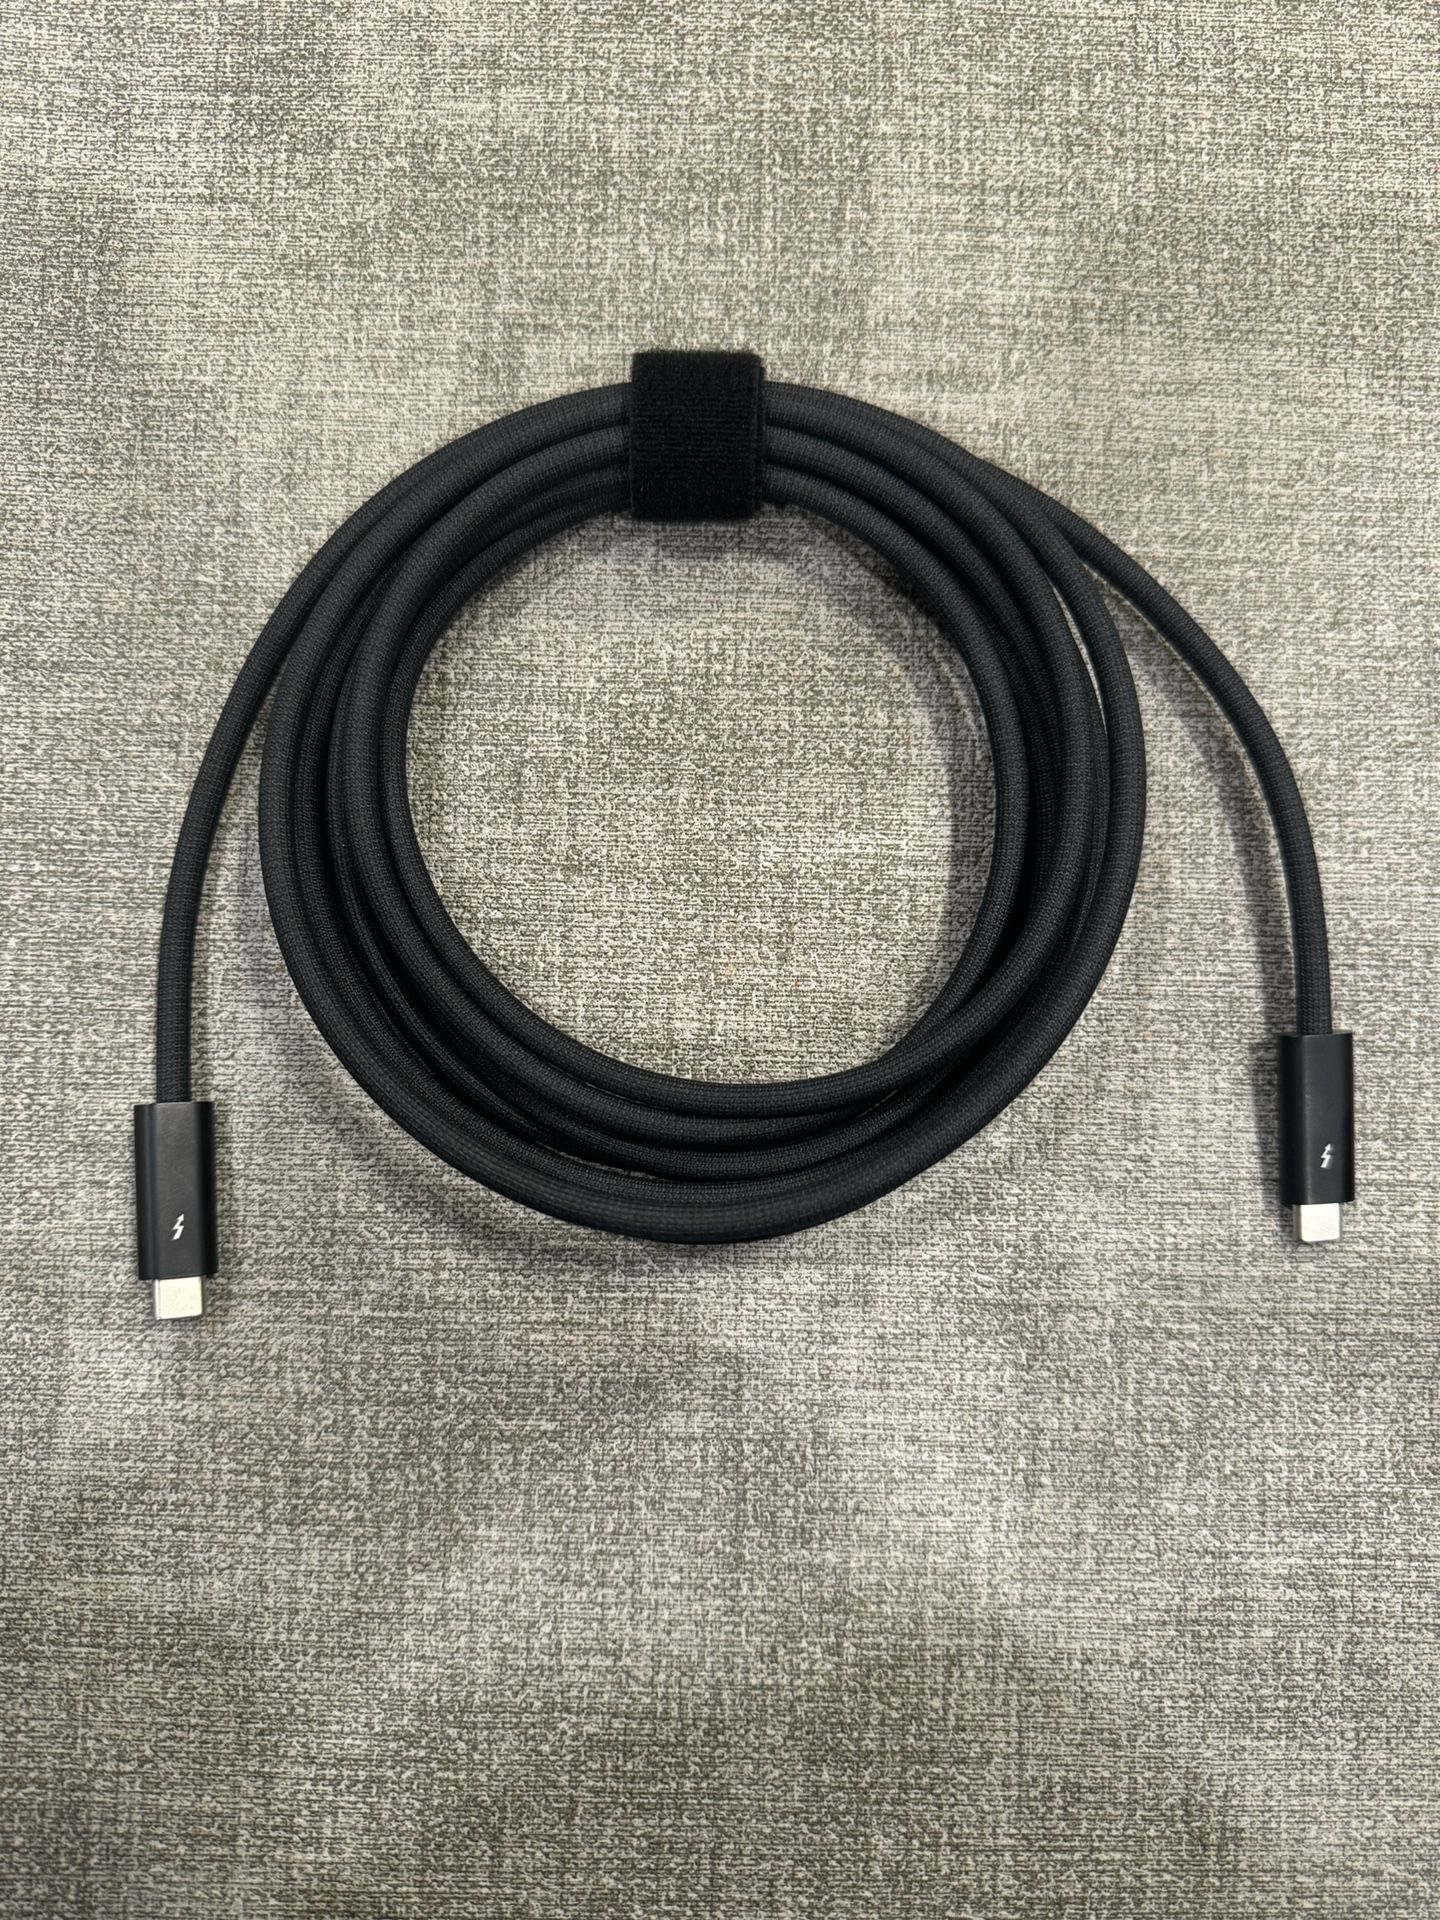 Apple Thunderbolt 4 USB-C Cable (3 Meter, 9 ft)